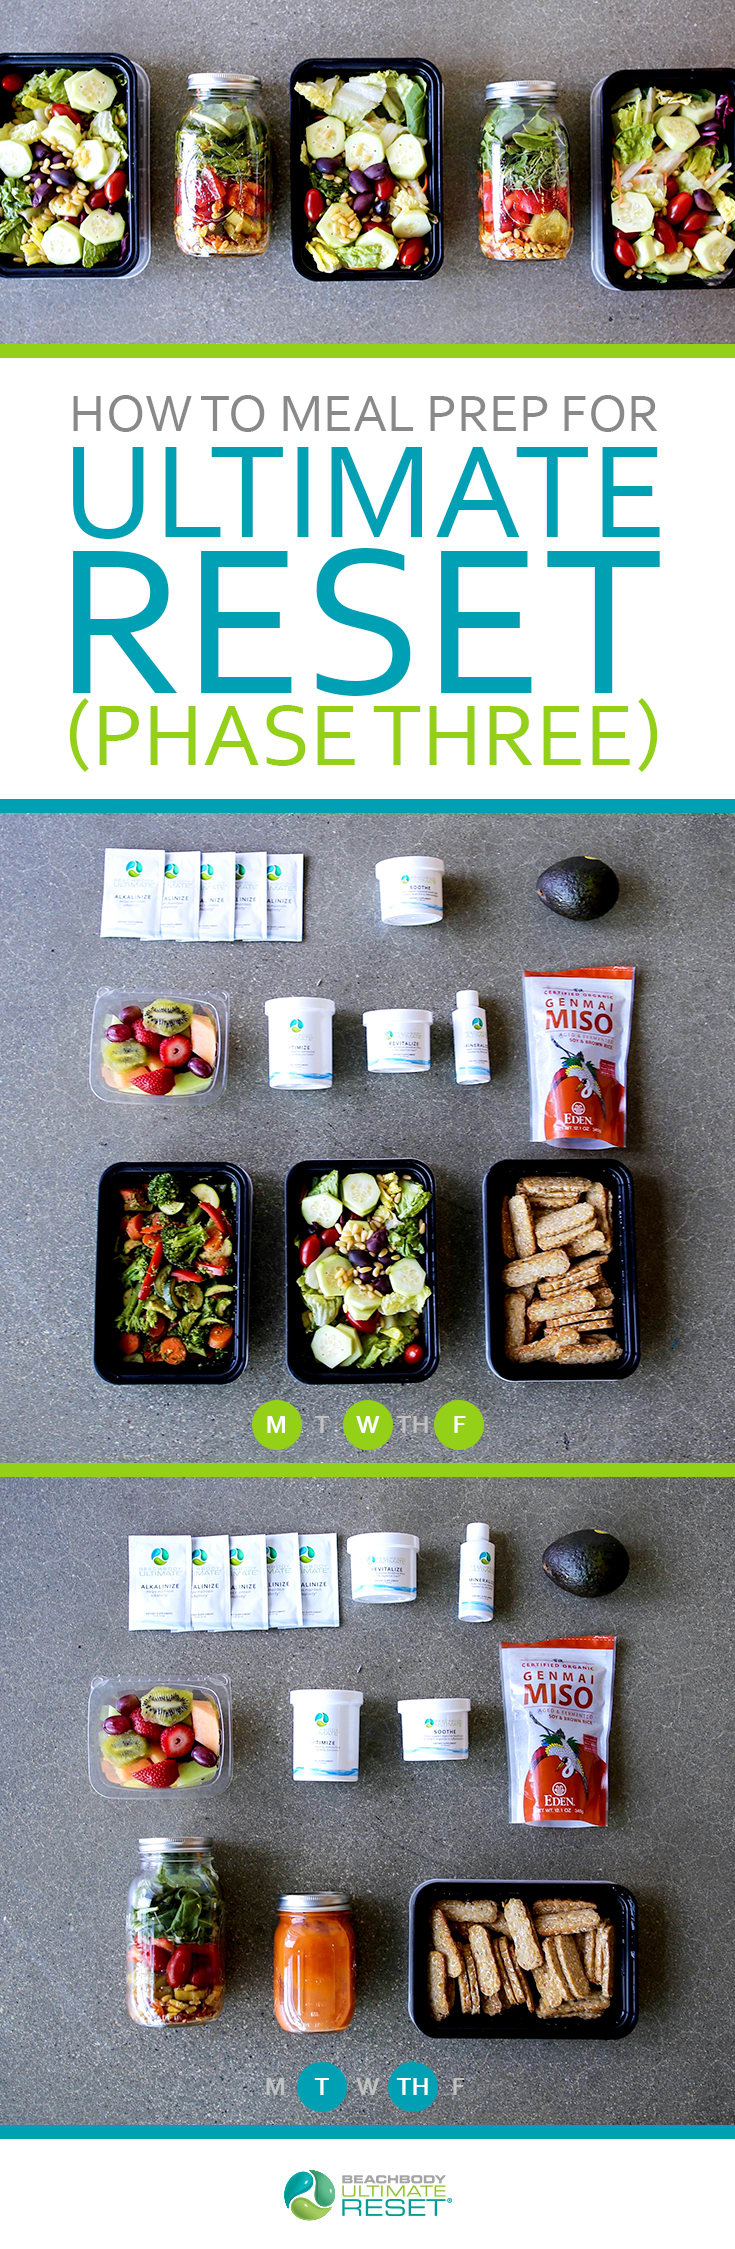 Ultimate Reset Meal Prep (Phase Three)